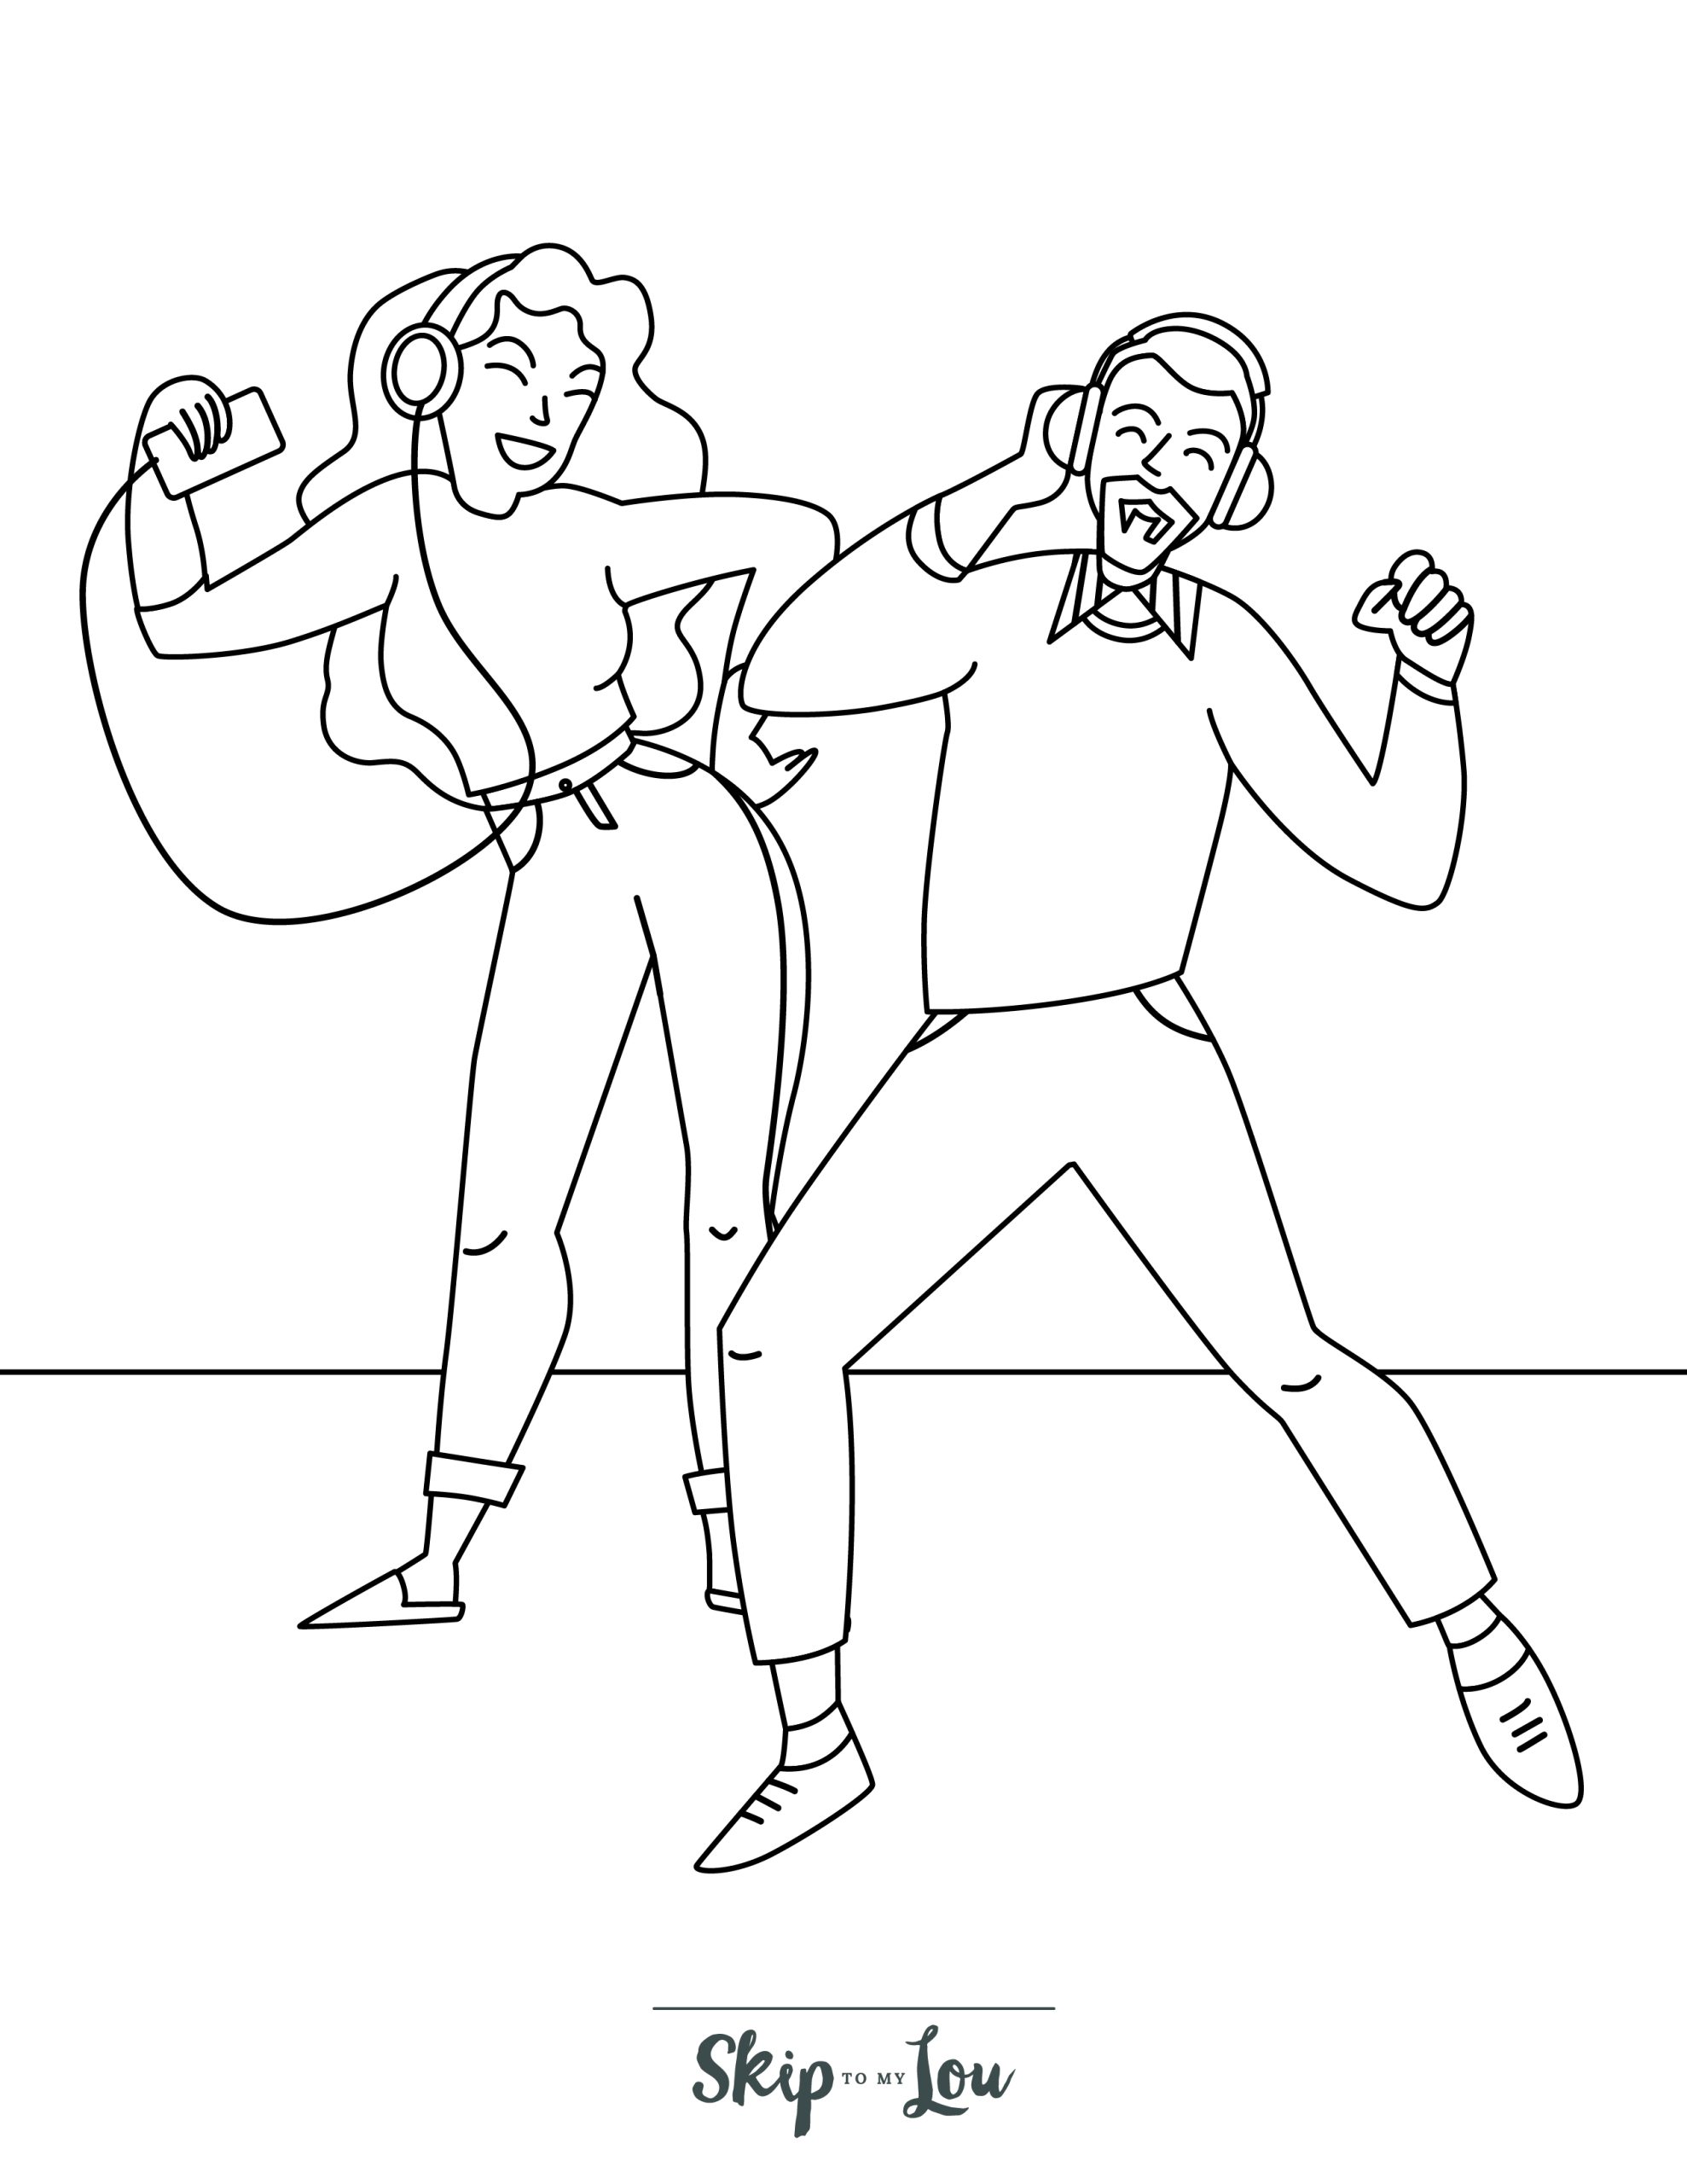 Skip to my Lou - People Coloring Pages - Line drawing of a couple dancing while wearing headphones